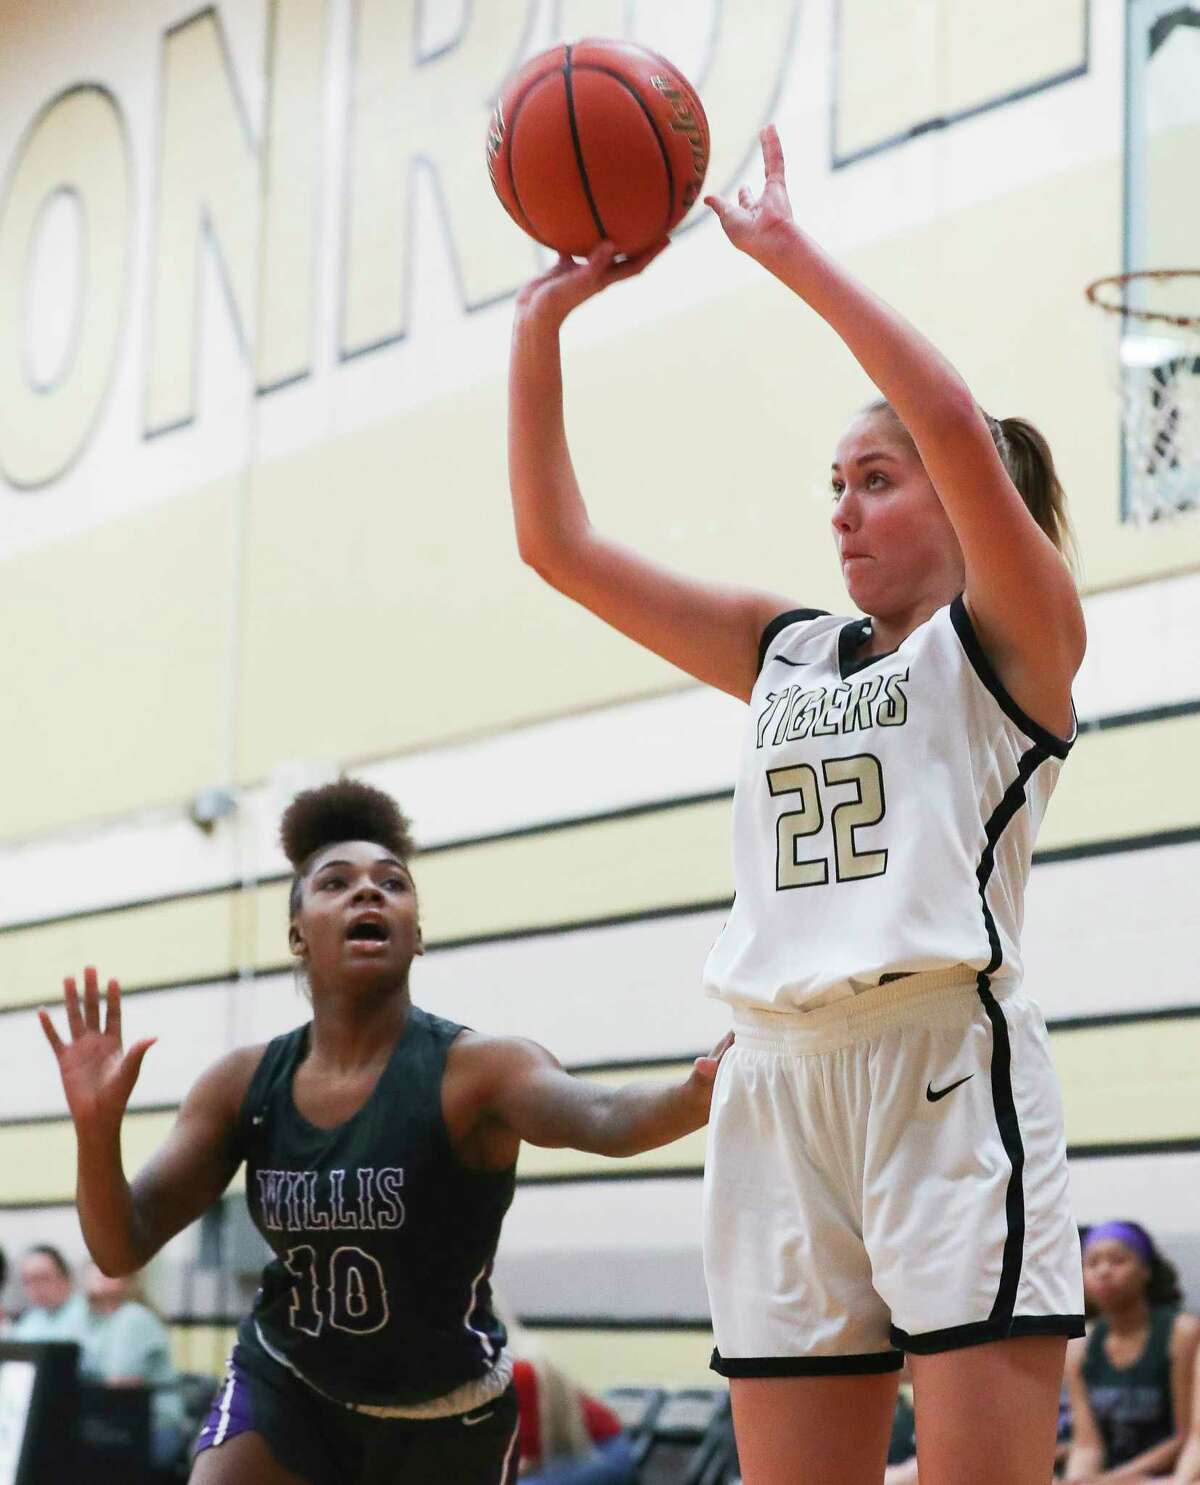 Conroe's Luisa Hamann (22) shoots a 3-pointer past Willis' Trrinity Davis (10) during the second quarter of a District 13-6A high school basketball game at Conroe High School, Tuesday, Dec. 6, 2022, in Conroe.